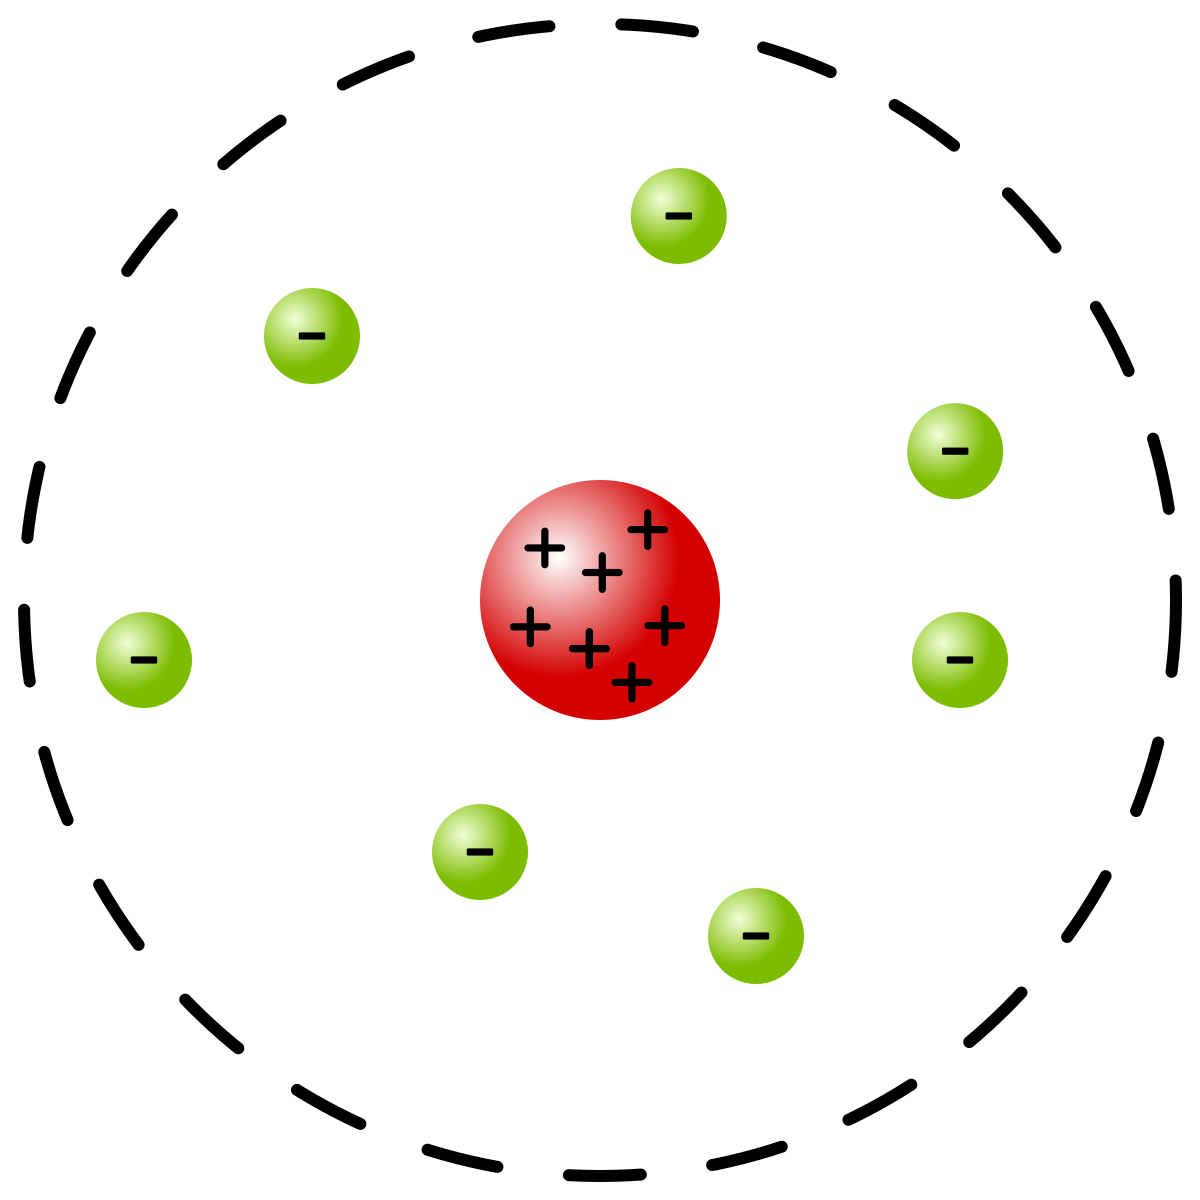 nuclear model (+ nucleus with - electrons outside)